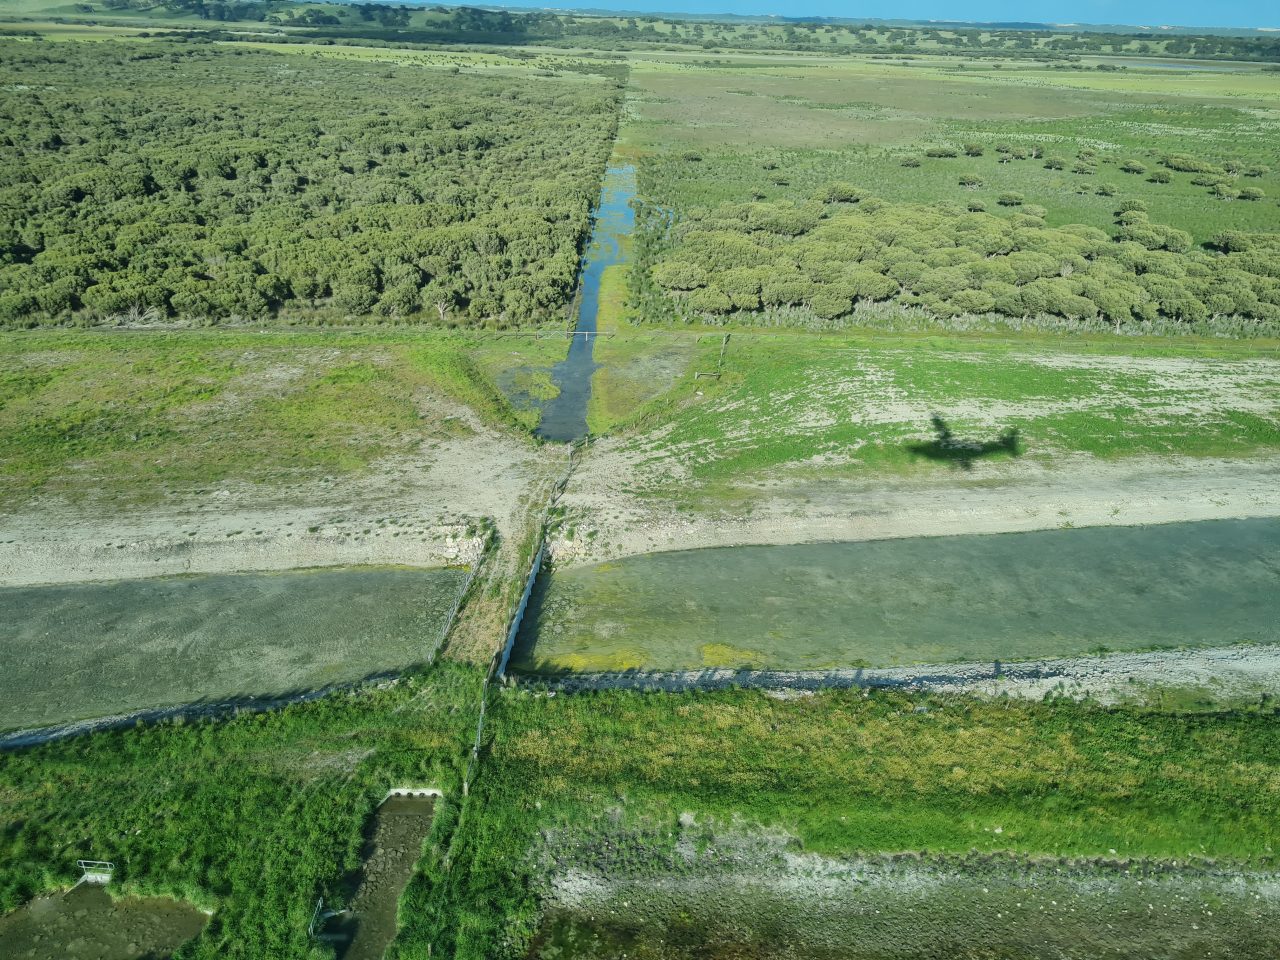 Aerial photo of a rectangular open water channel that has been cut into the land. There are smaller drains flowing into it that bisect a green vegetated landscape on sandy soil